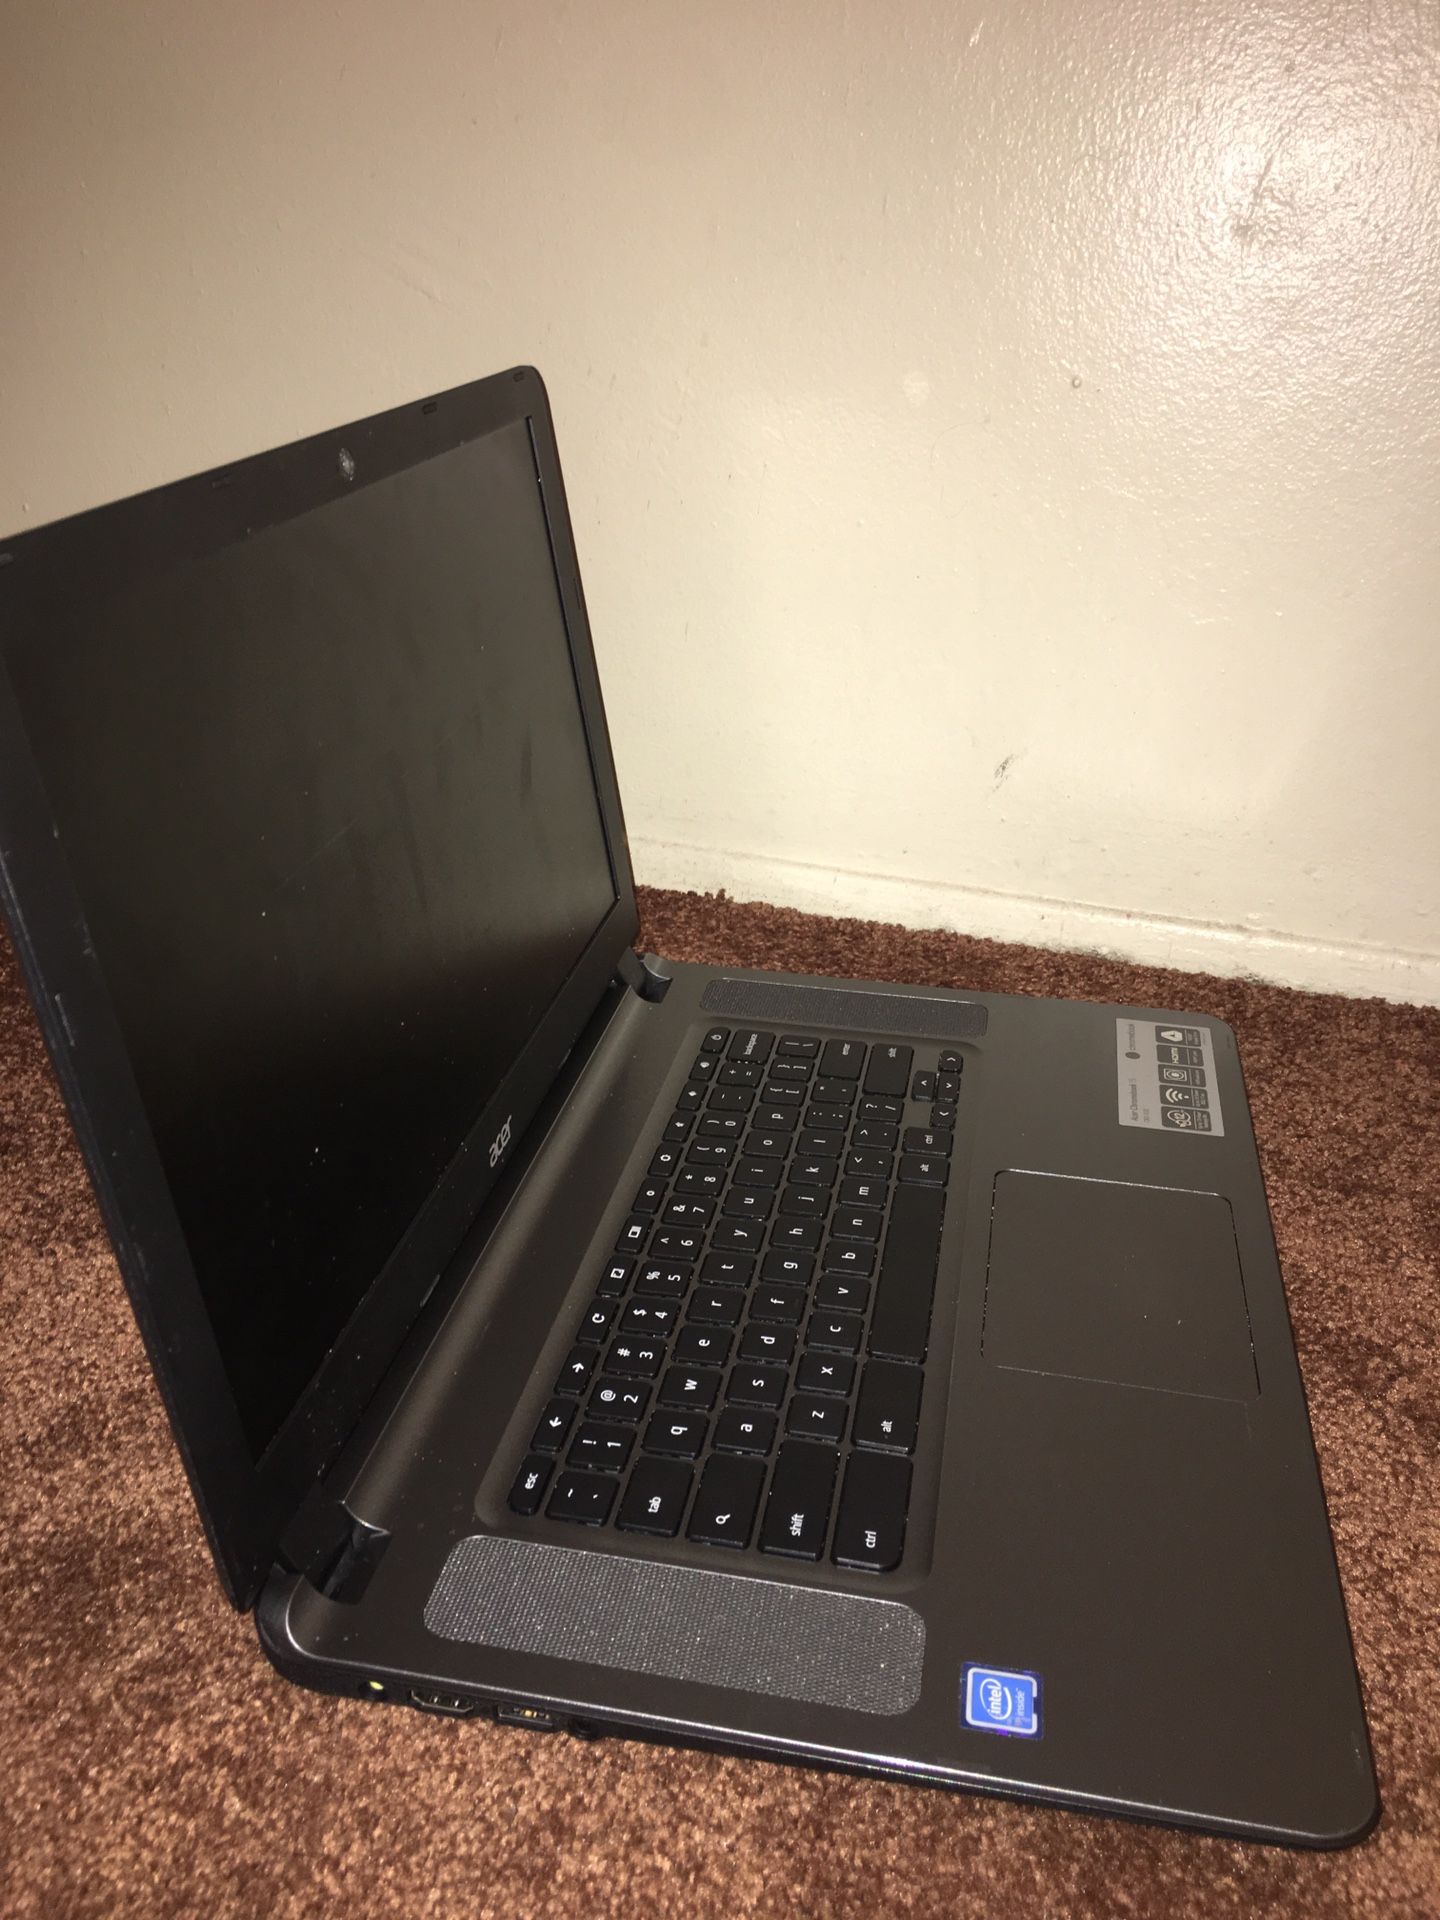 acer chromebook 15.6” 2018 for use or parts! [needs fixing]